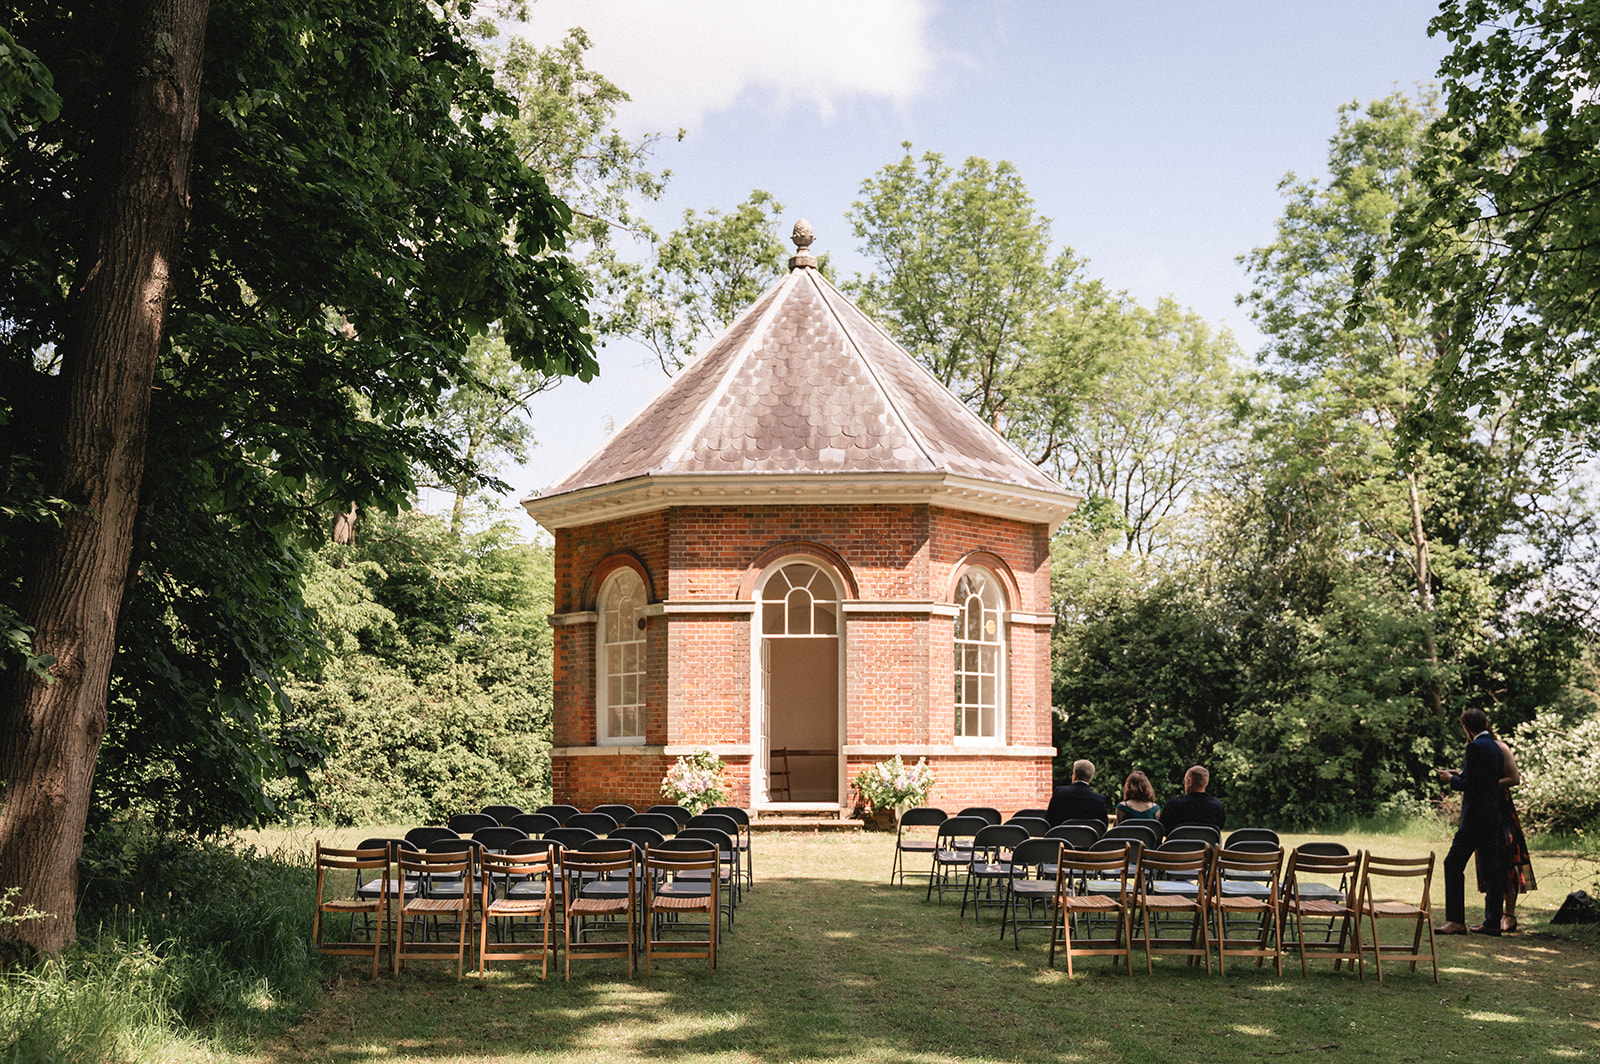 Eleanor and Hartley Wedding ceremony at the Organ House at St. Paul's Walden Bury